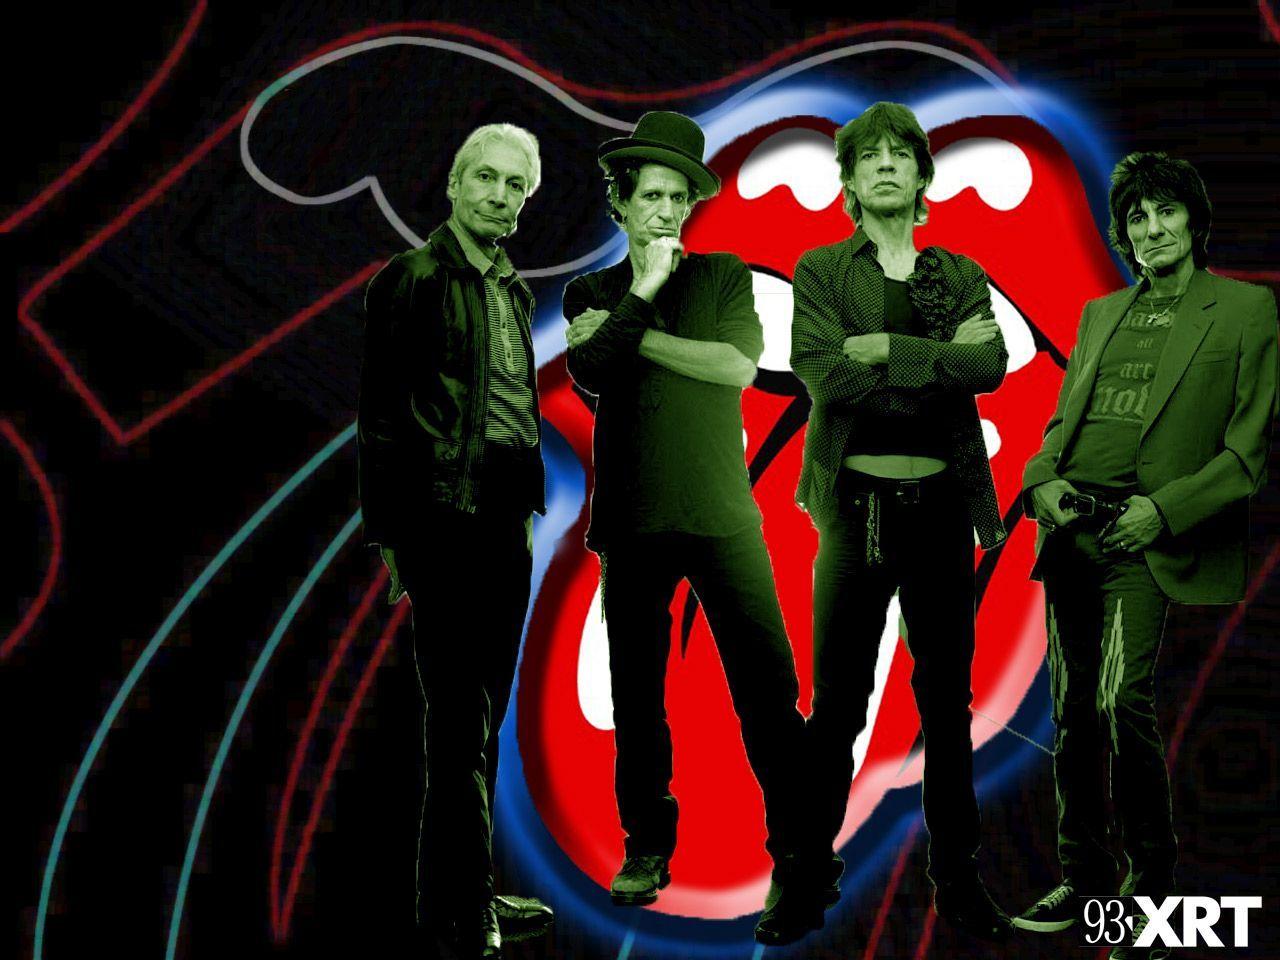 The Rolling Stones HD image. The Rolling Stones wallpaper